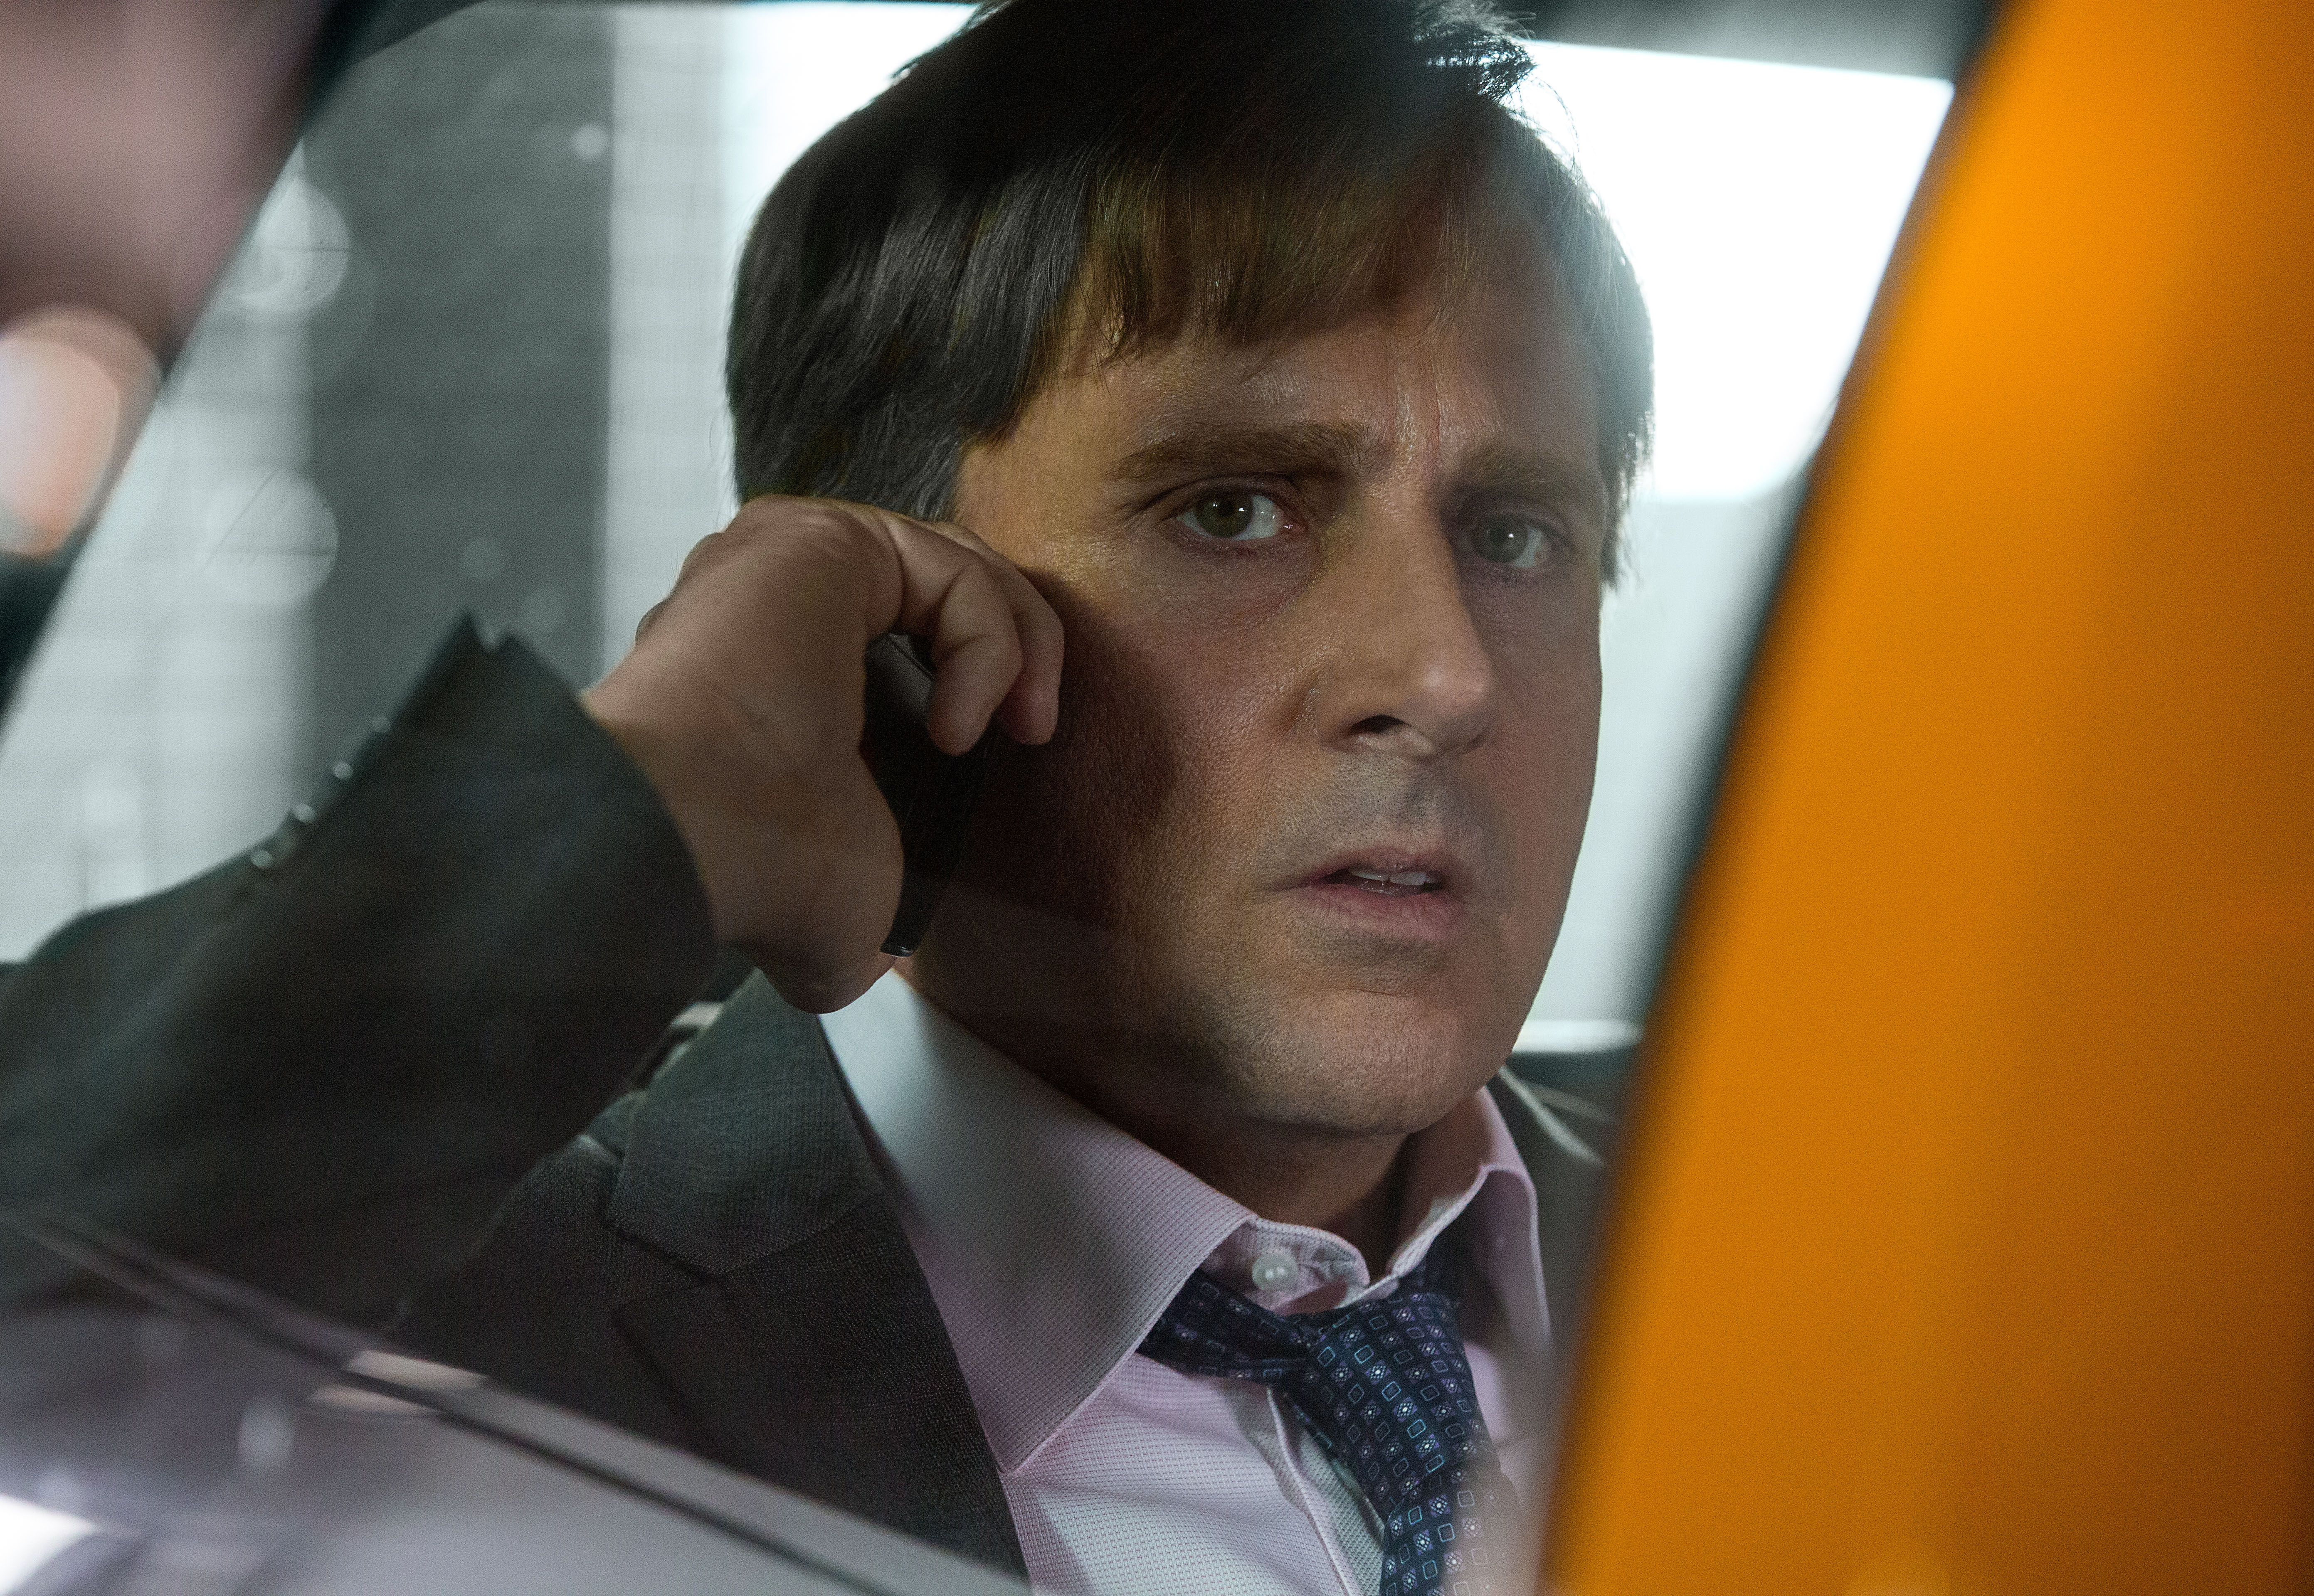 Steve Carell plays Mark Baum in The Big Short from Paramount Pictures and Regency Enterprises